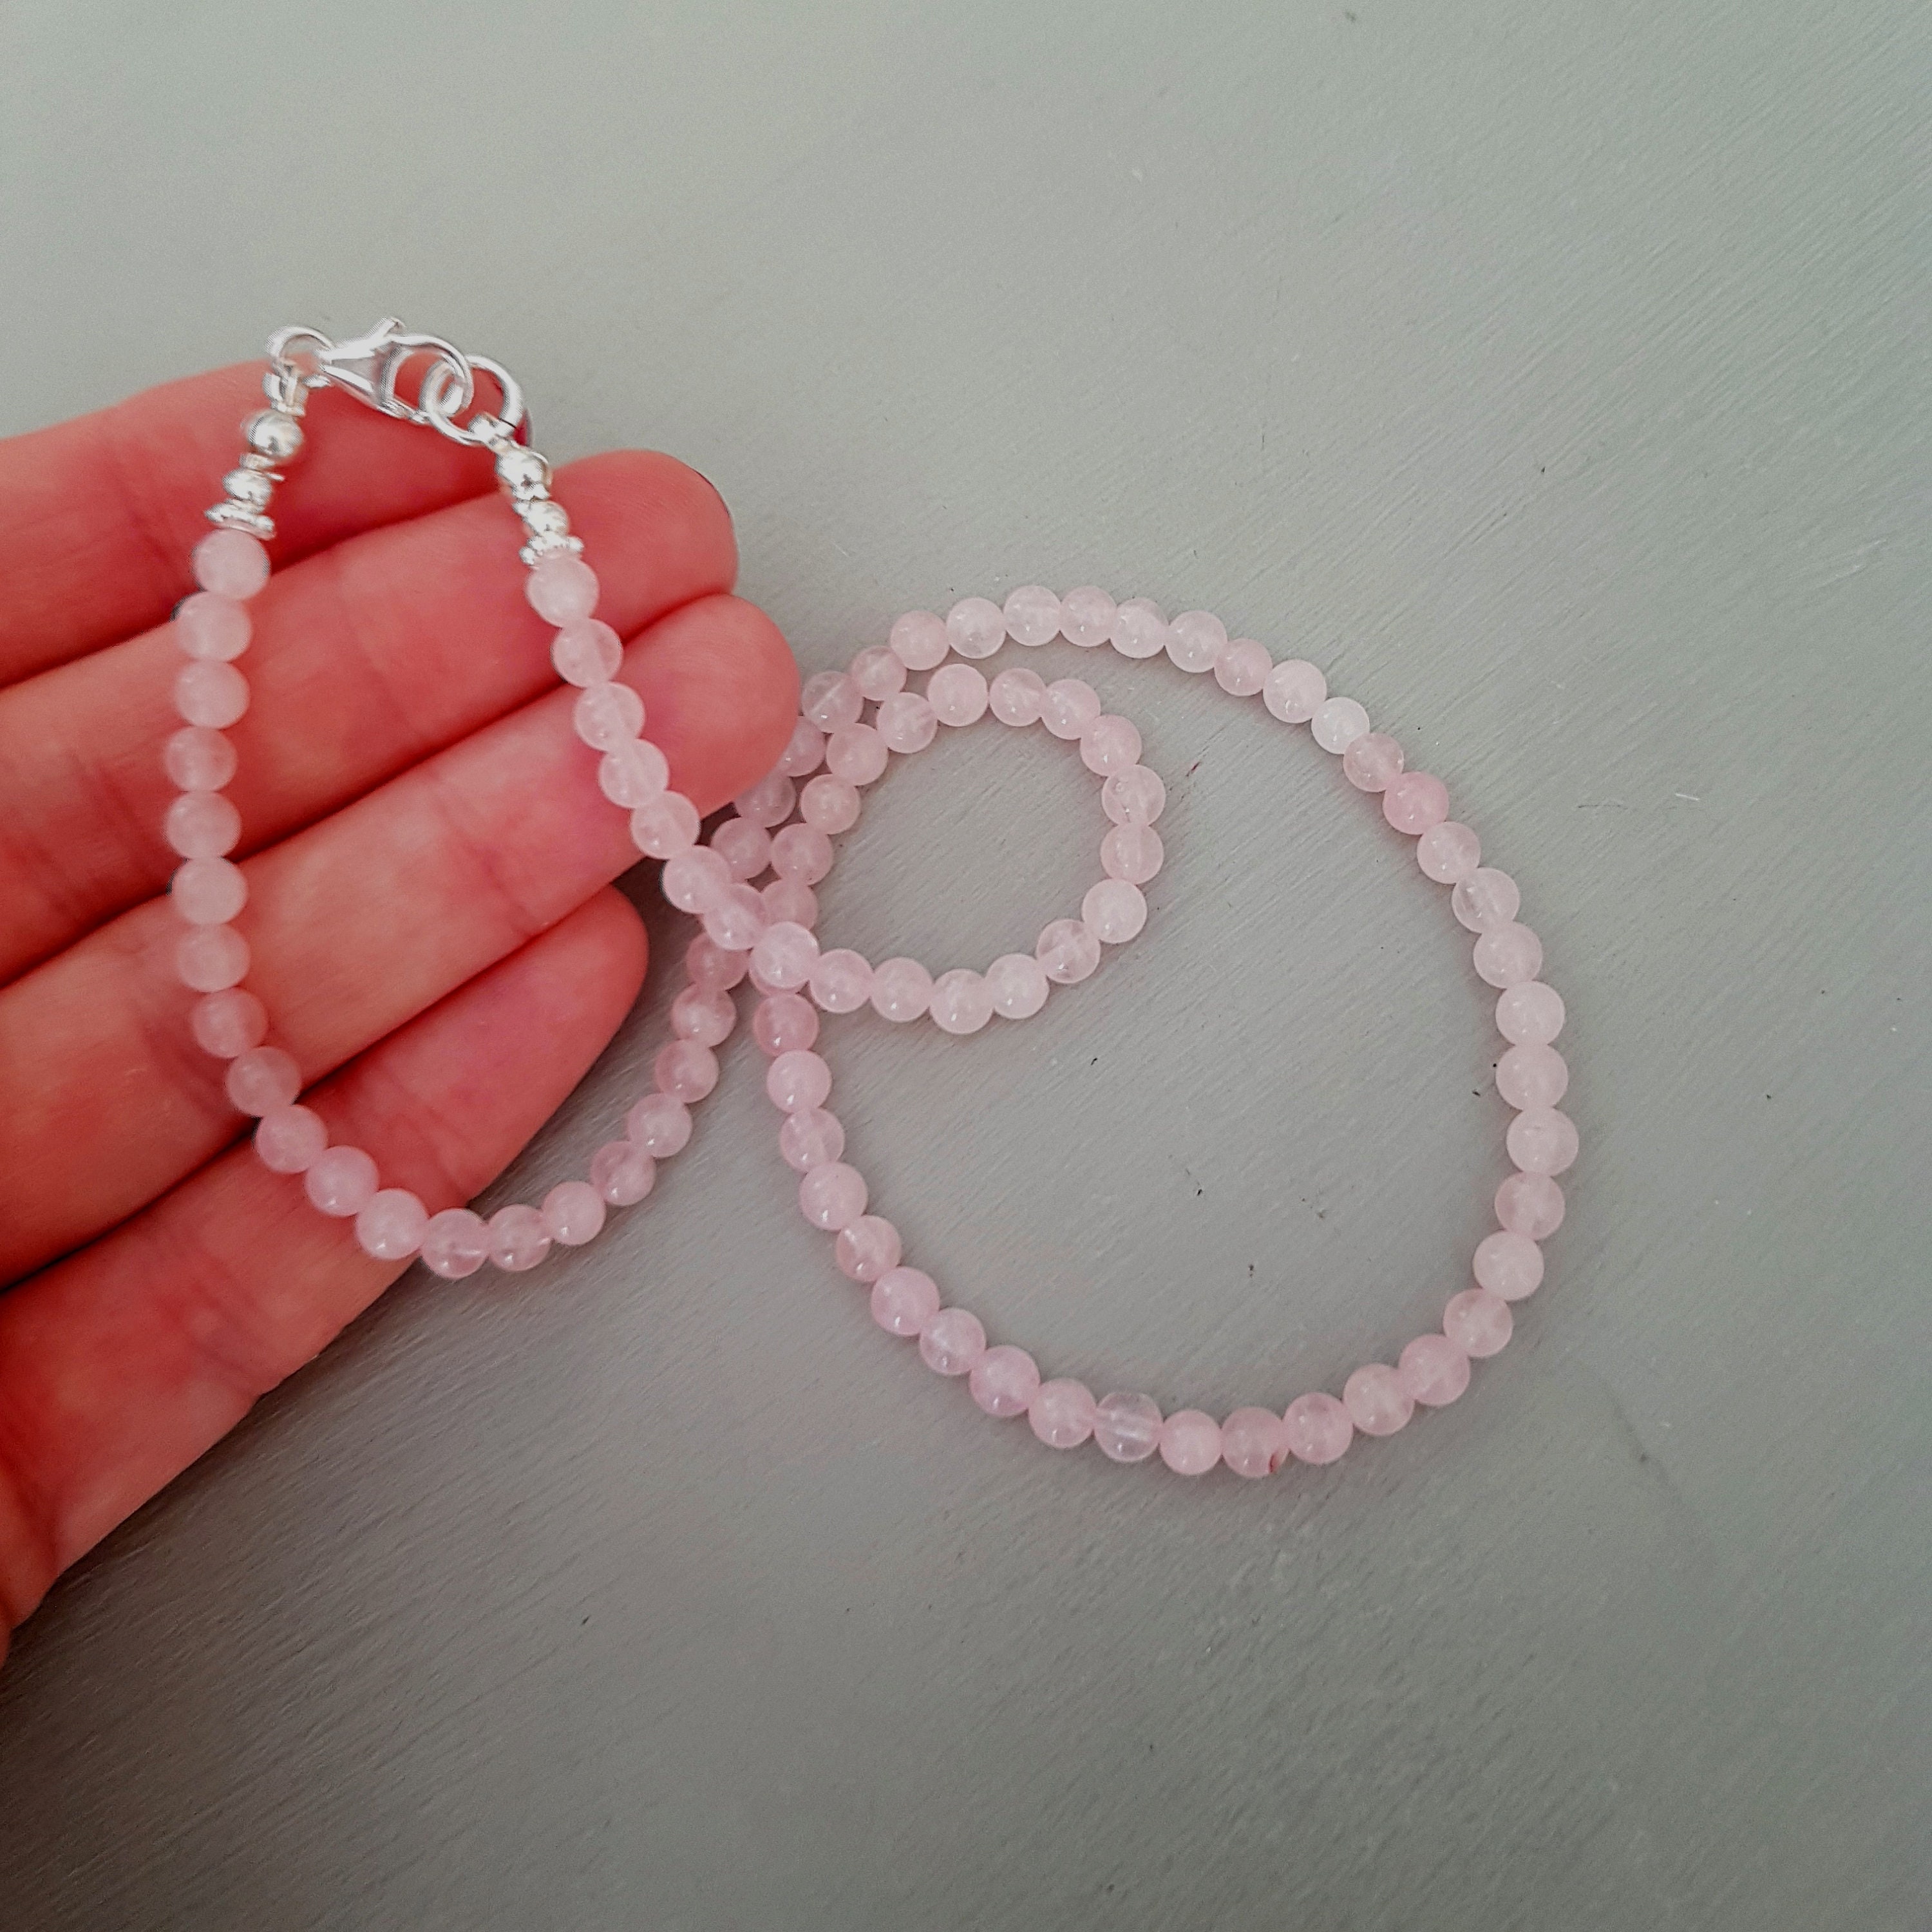 Tiny Rose Quartz necklace choker Sterling Silver or 14K Gold Fill ...